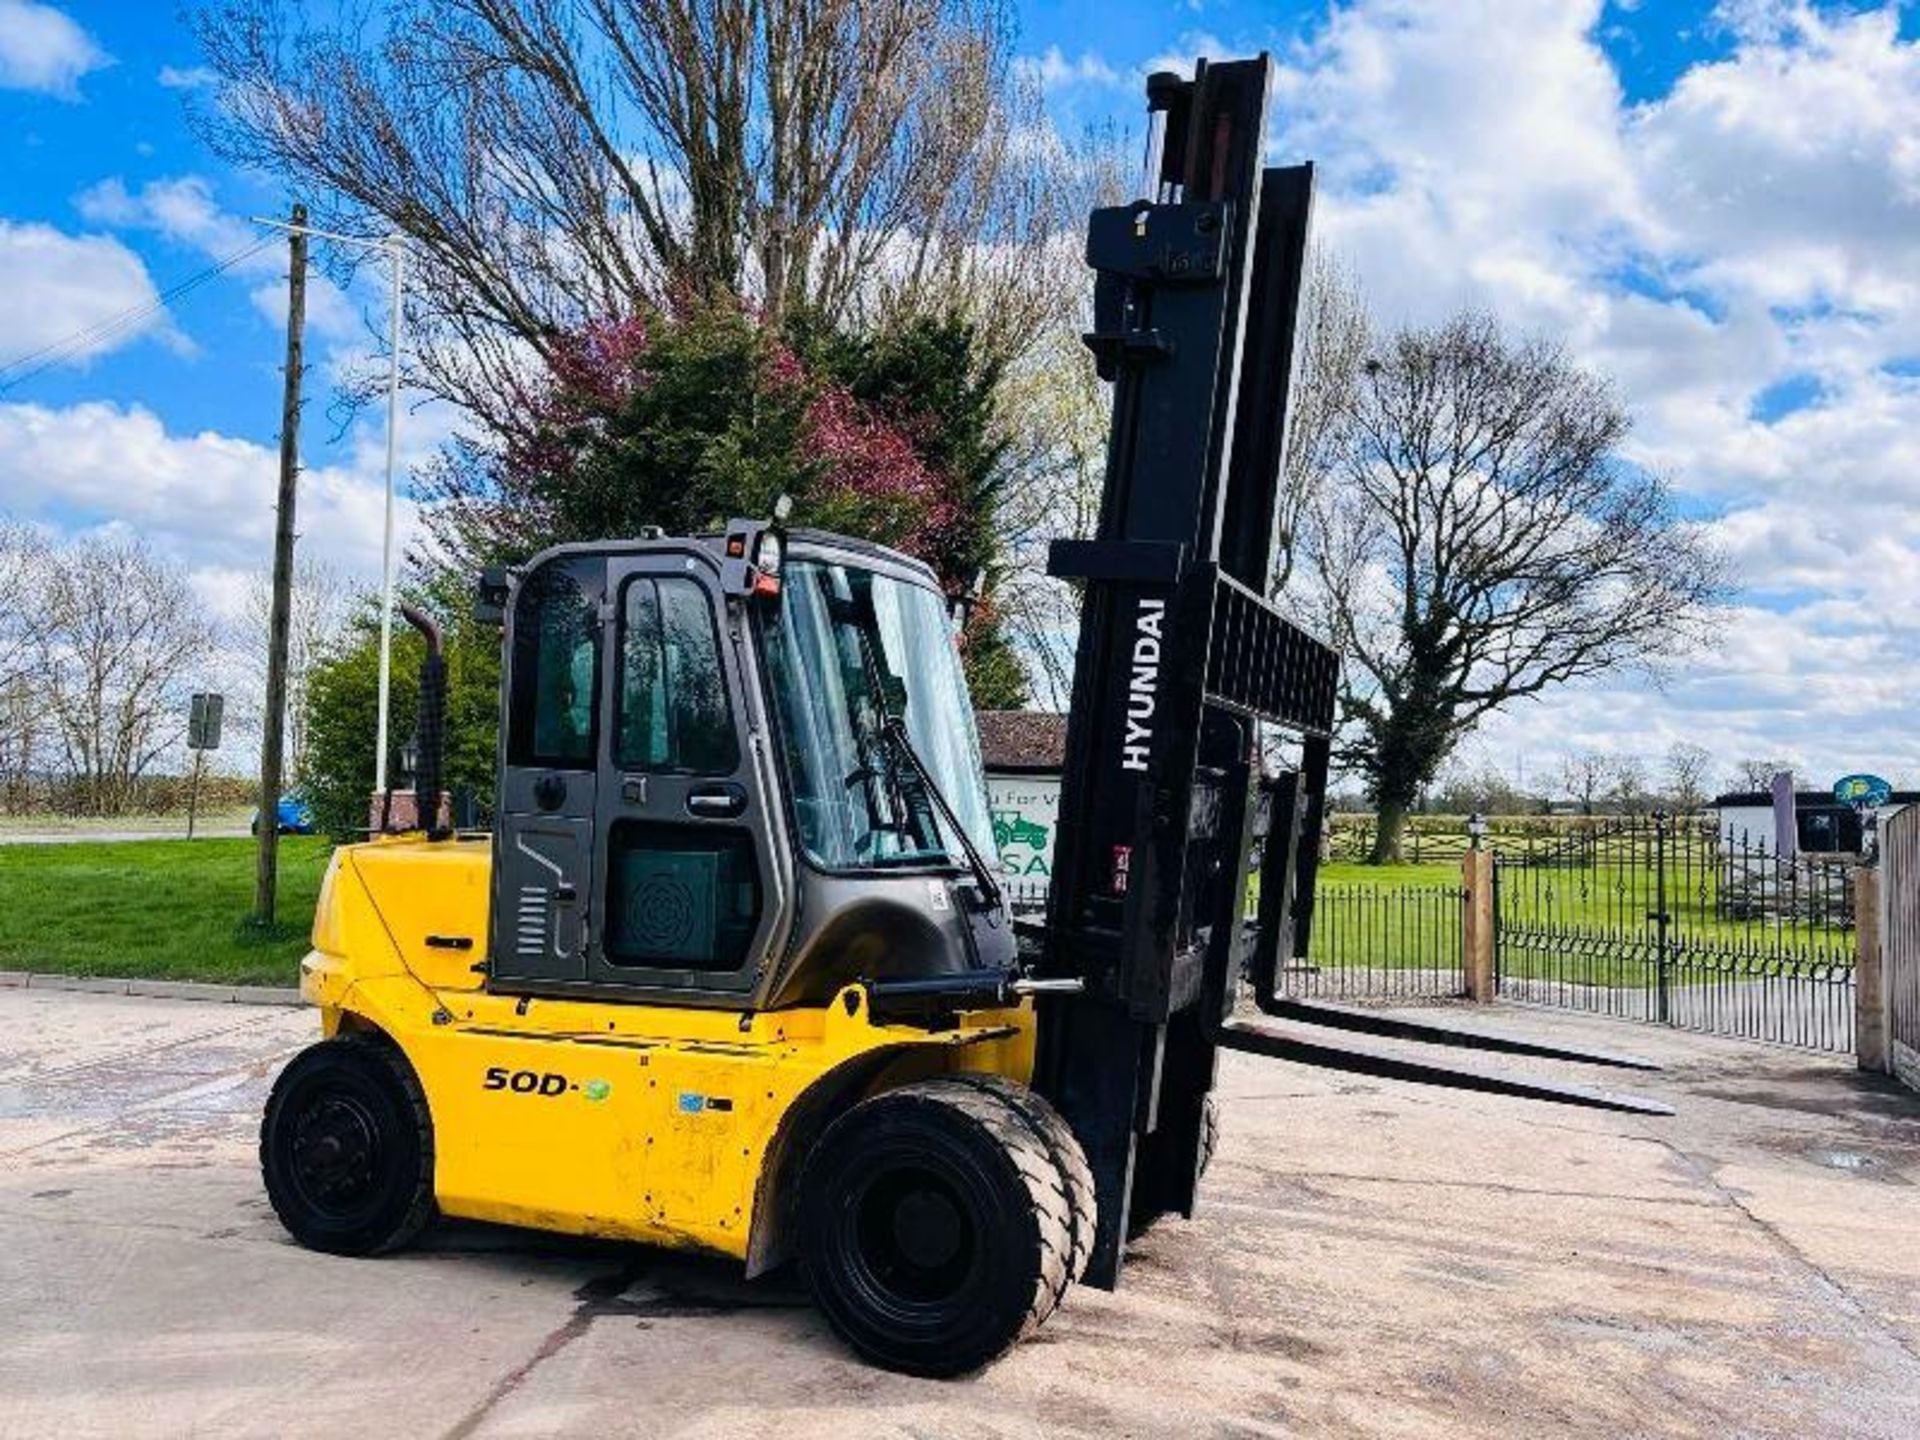 HYUNDAI 50D-9 DIESEL FORKLIFT *YEAR 2016, 5 TON LIFT* C/W SIDE SHIFT - Image 7 of 17